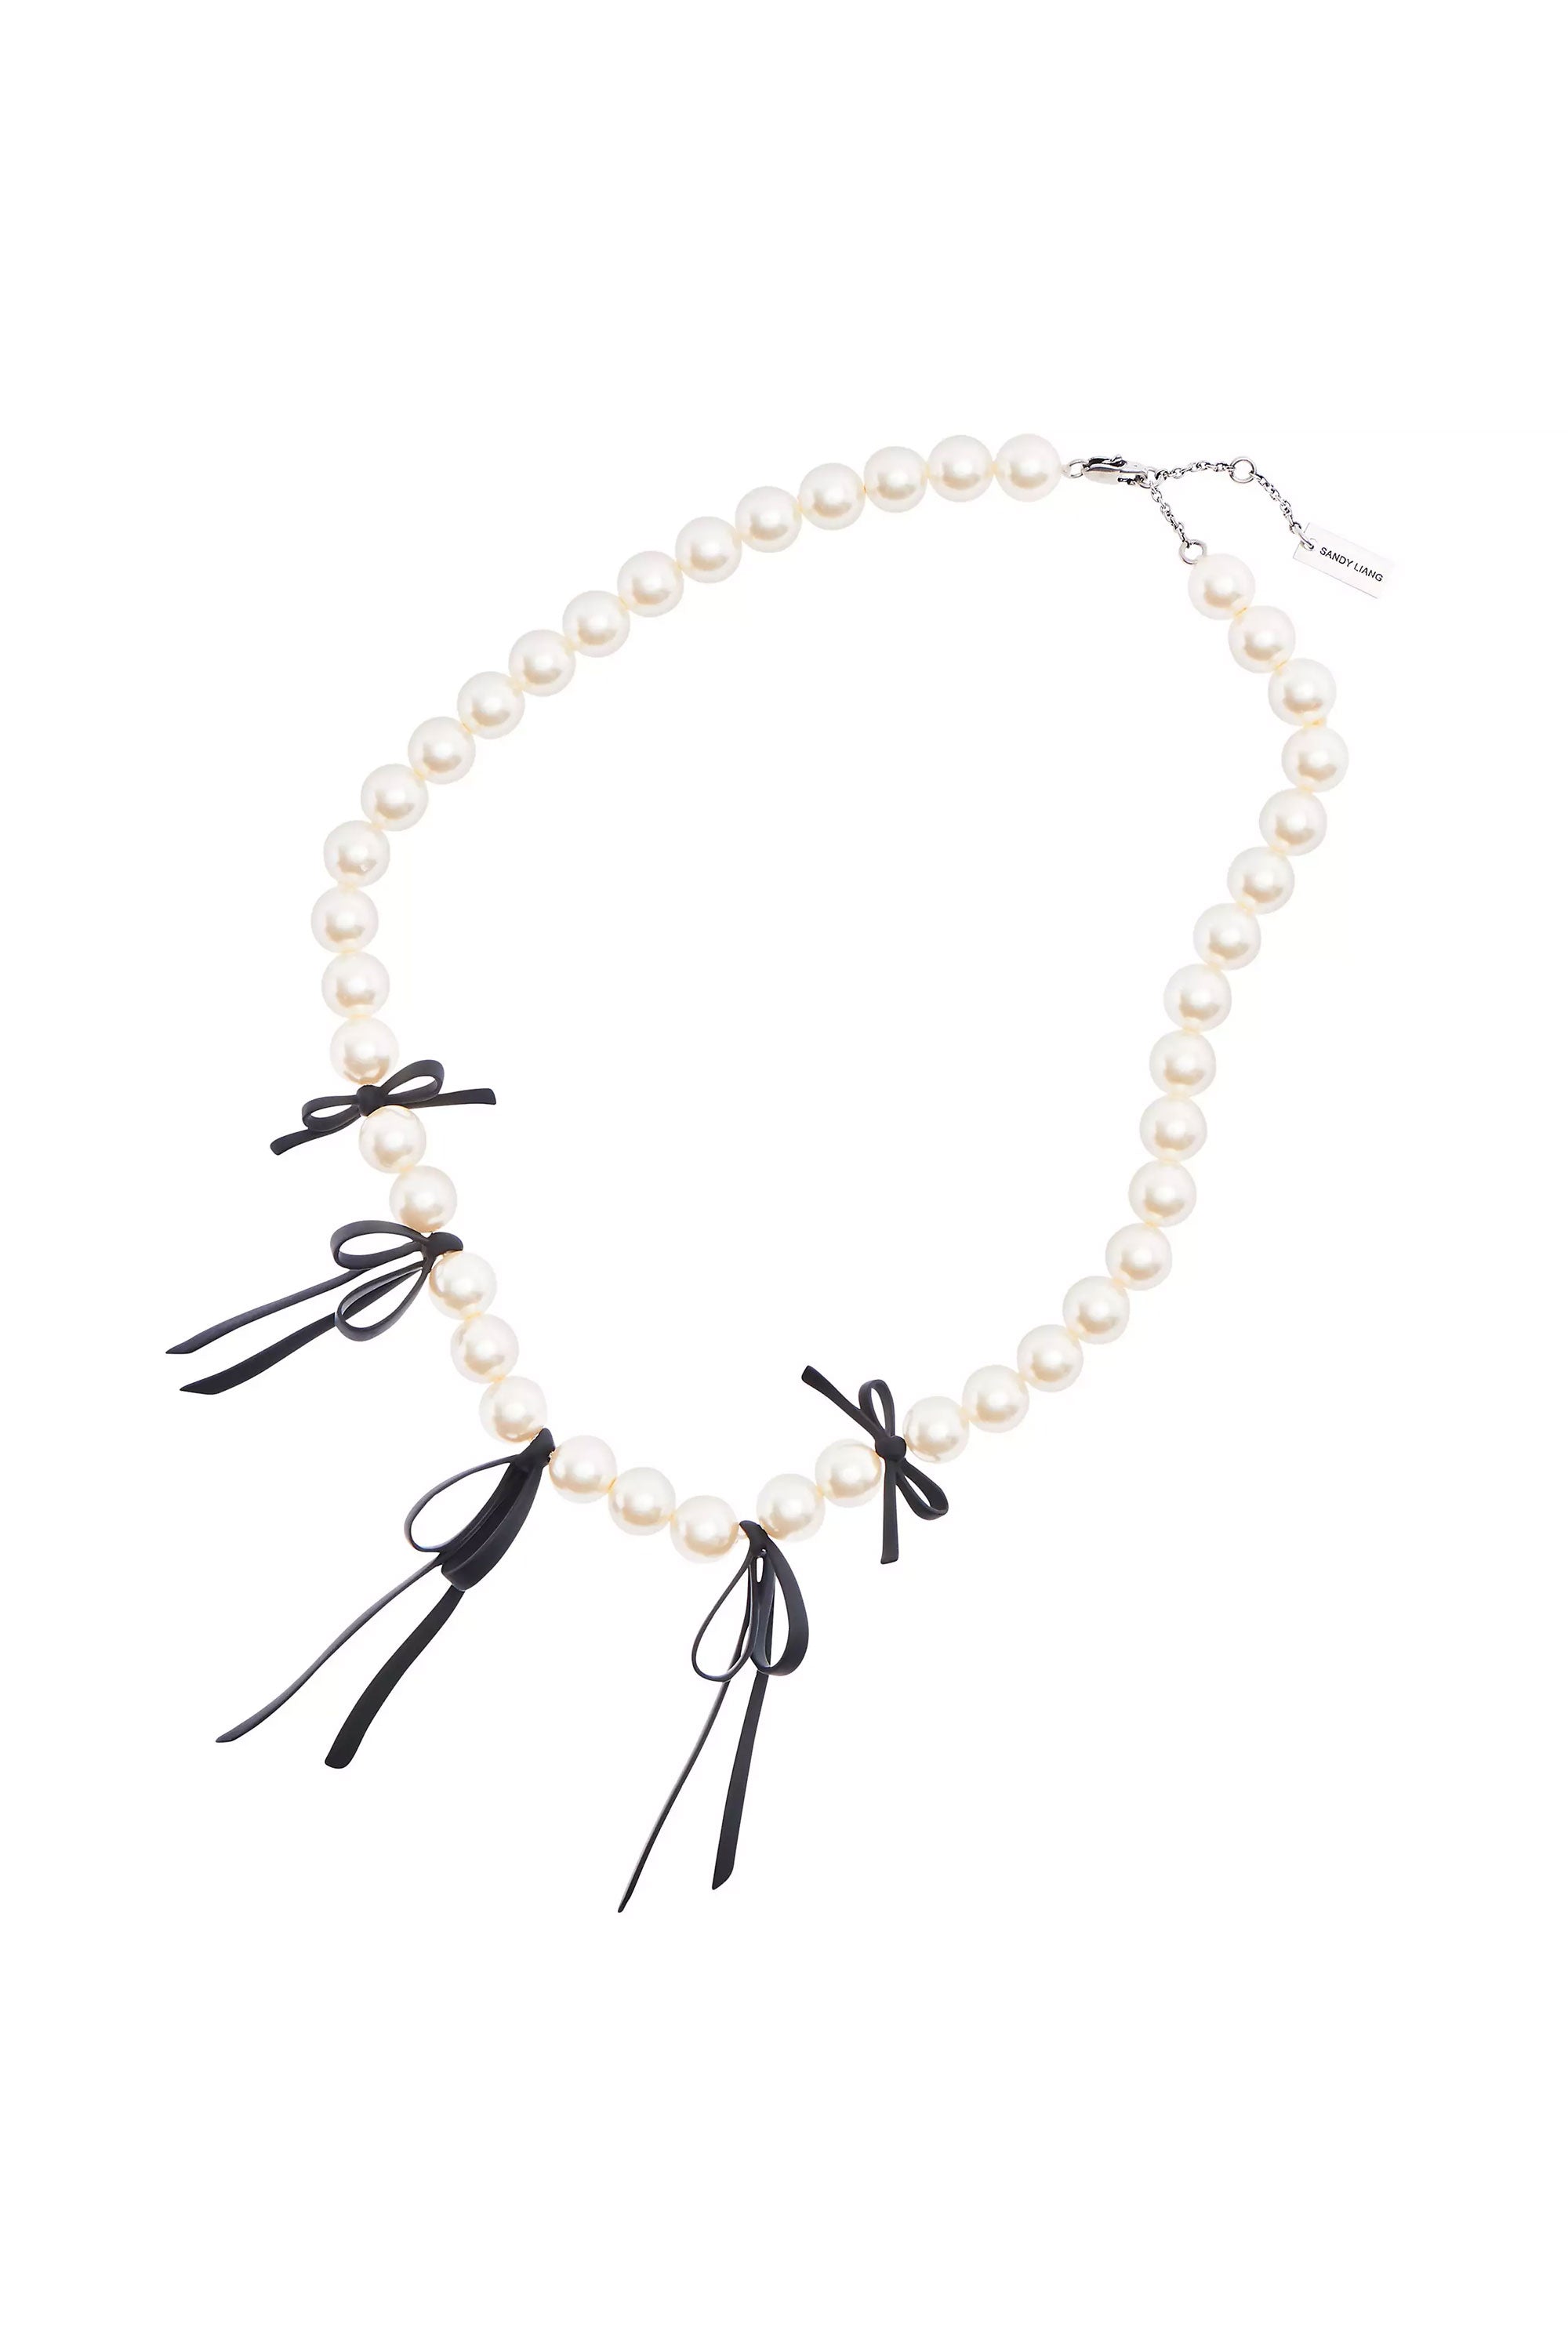 The HEAVEN - SANDY LIANG PEARL NECKLACE  available online with global shipping, and in PAM Stores Melbourne and Sydney.